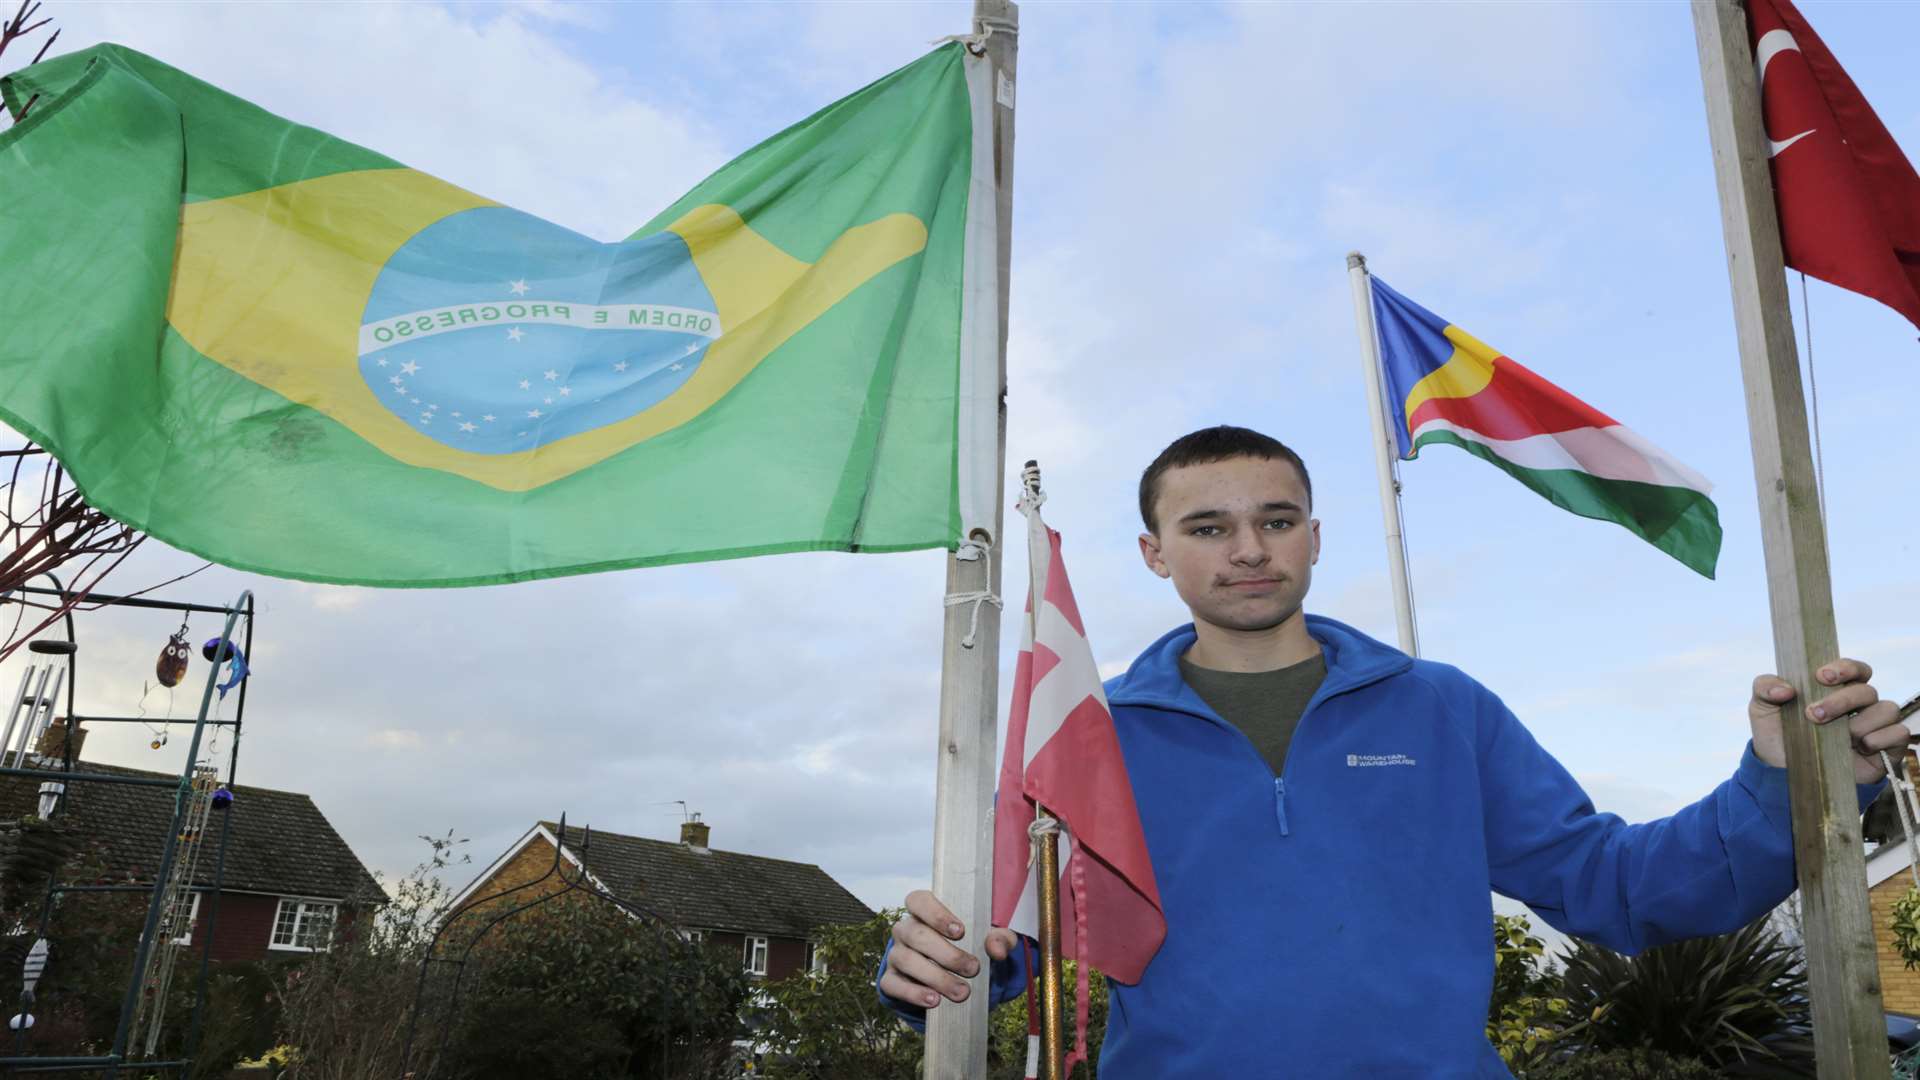 Liam has been told his displaying his flags would disrupt neighbours' views